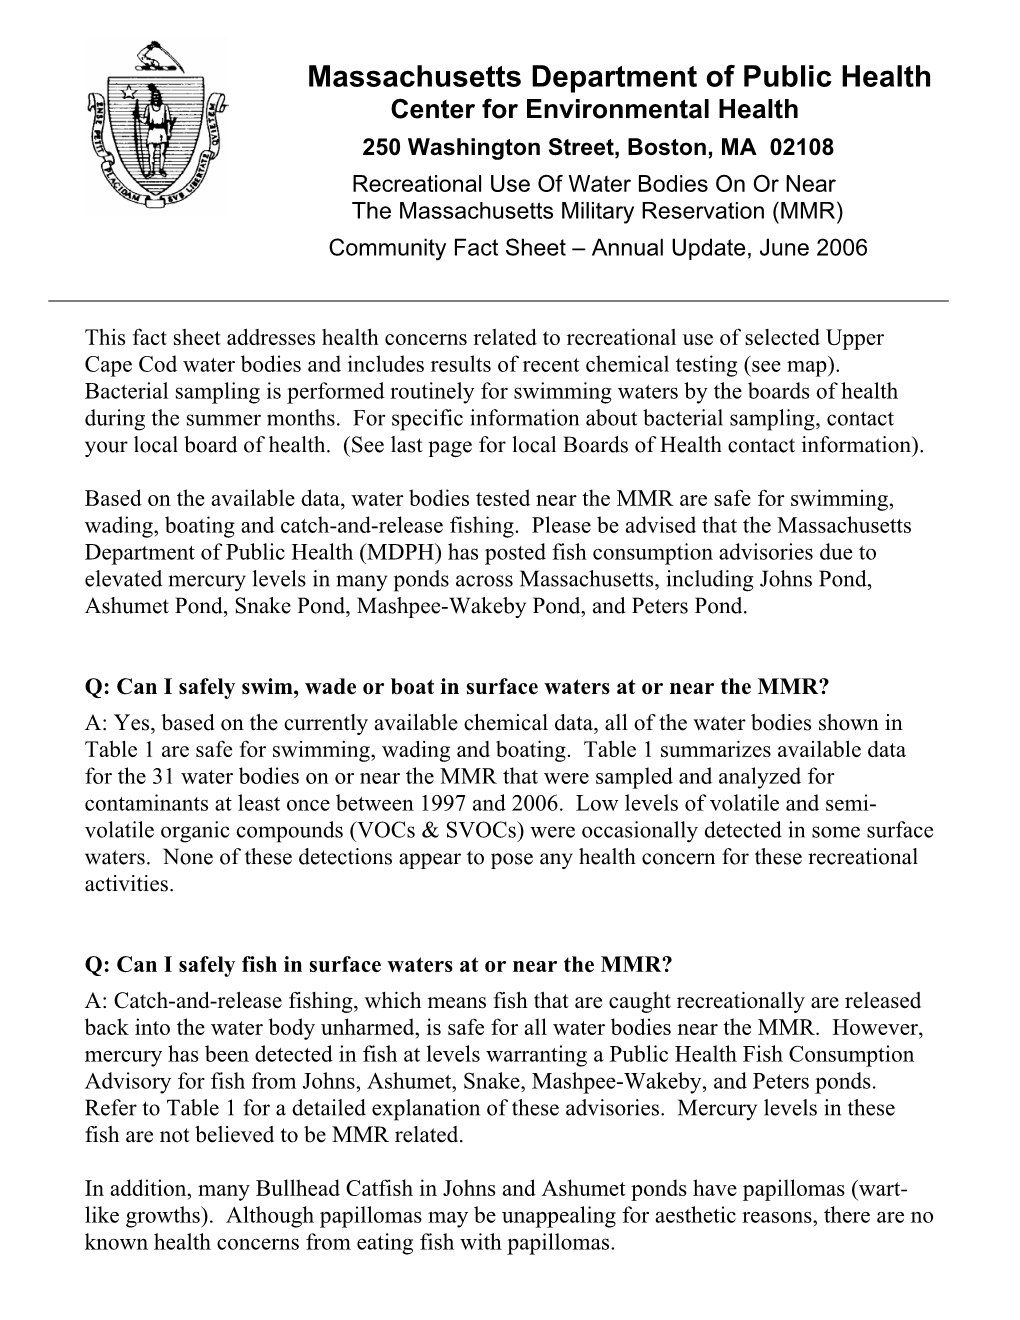 Recreational Use of Water Bodies on Or Near the Massachusetts Military Reservation (MMR) Community Fact Sheet – Annual Update, June 2006